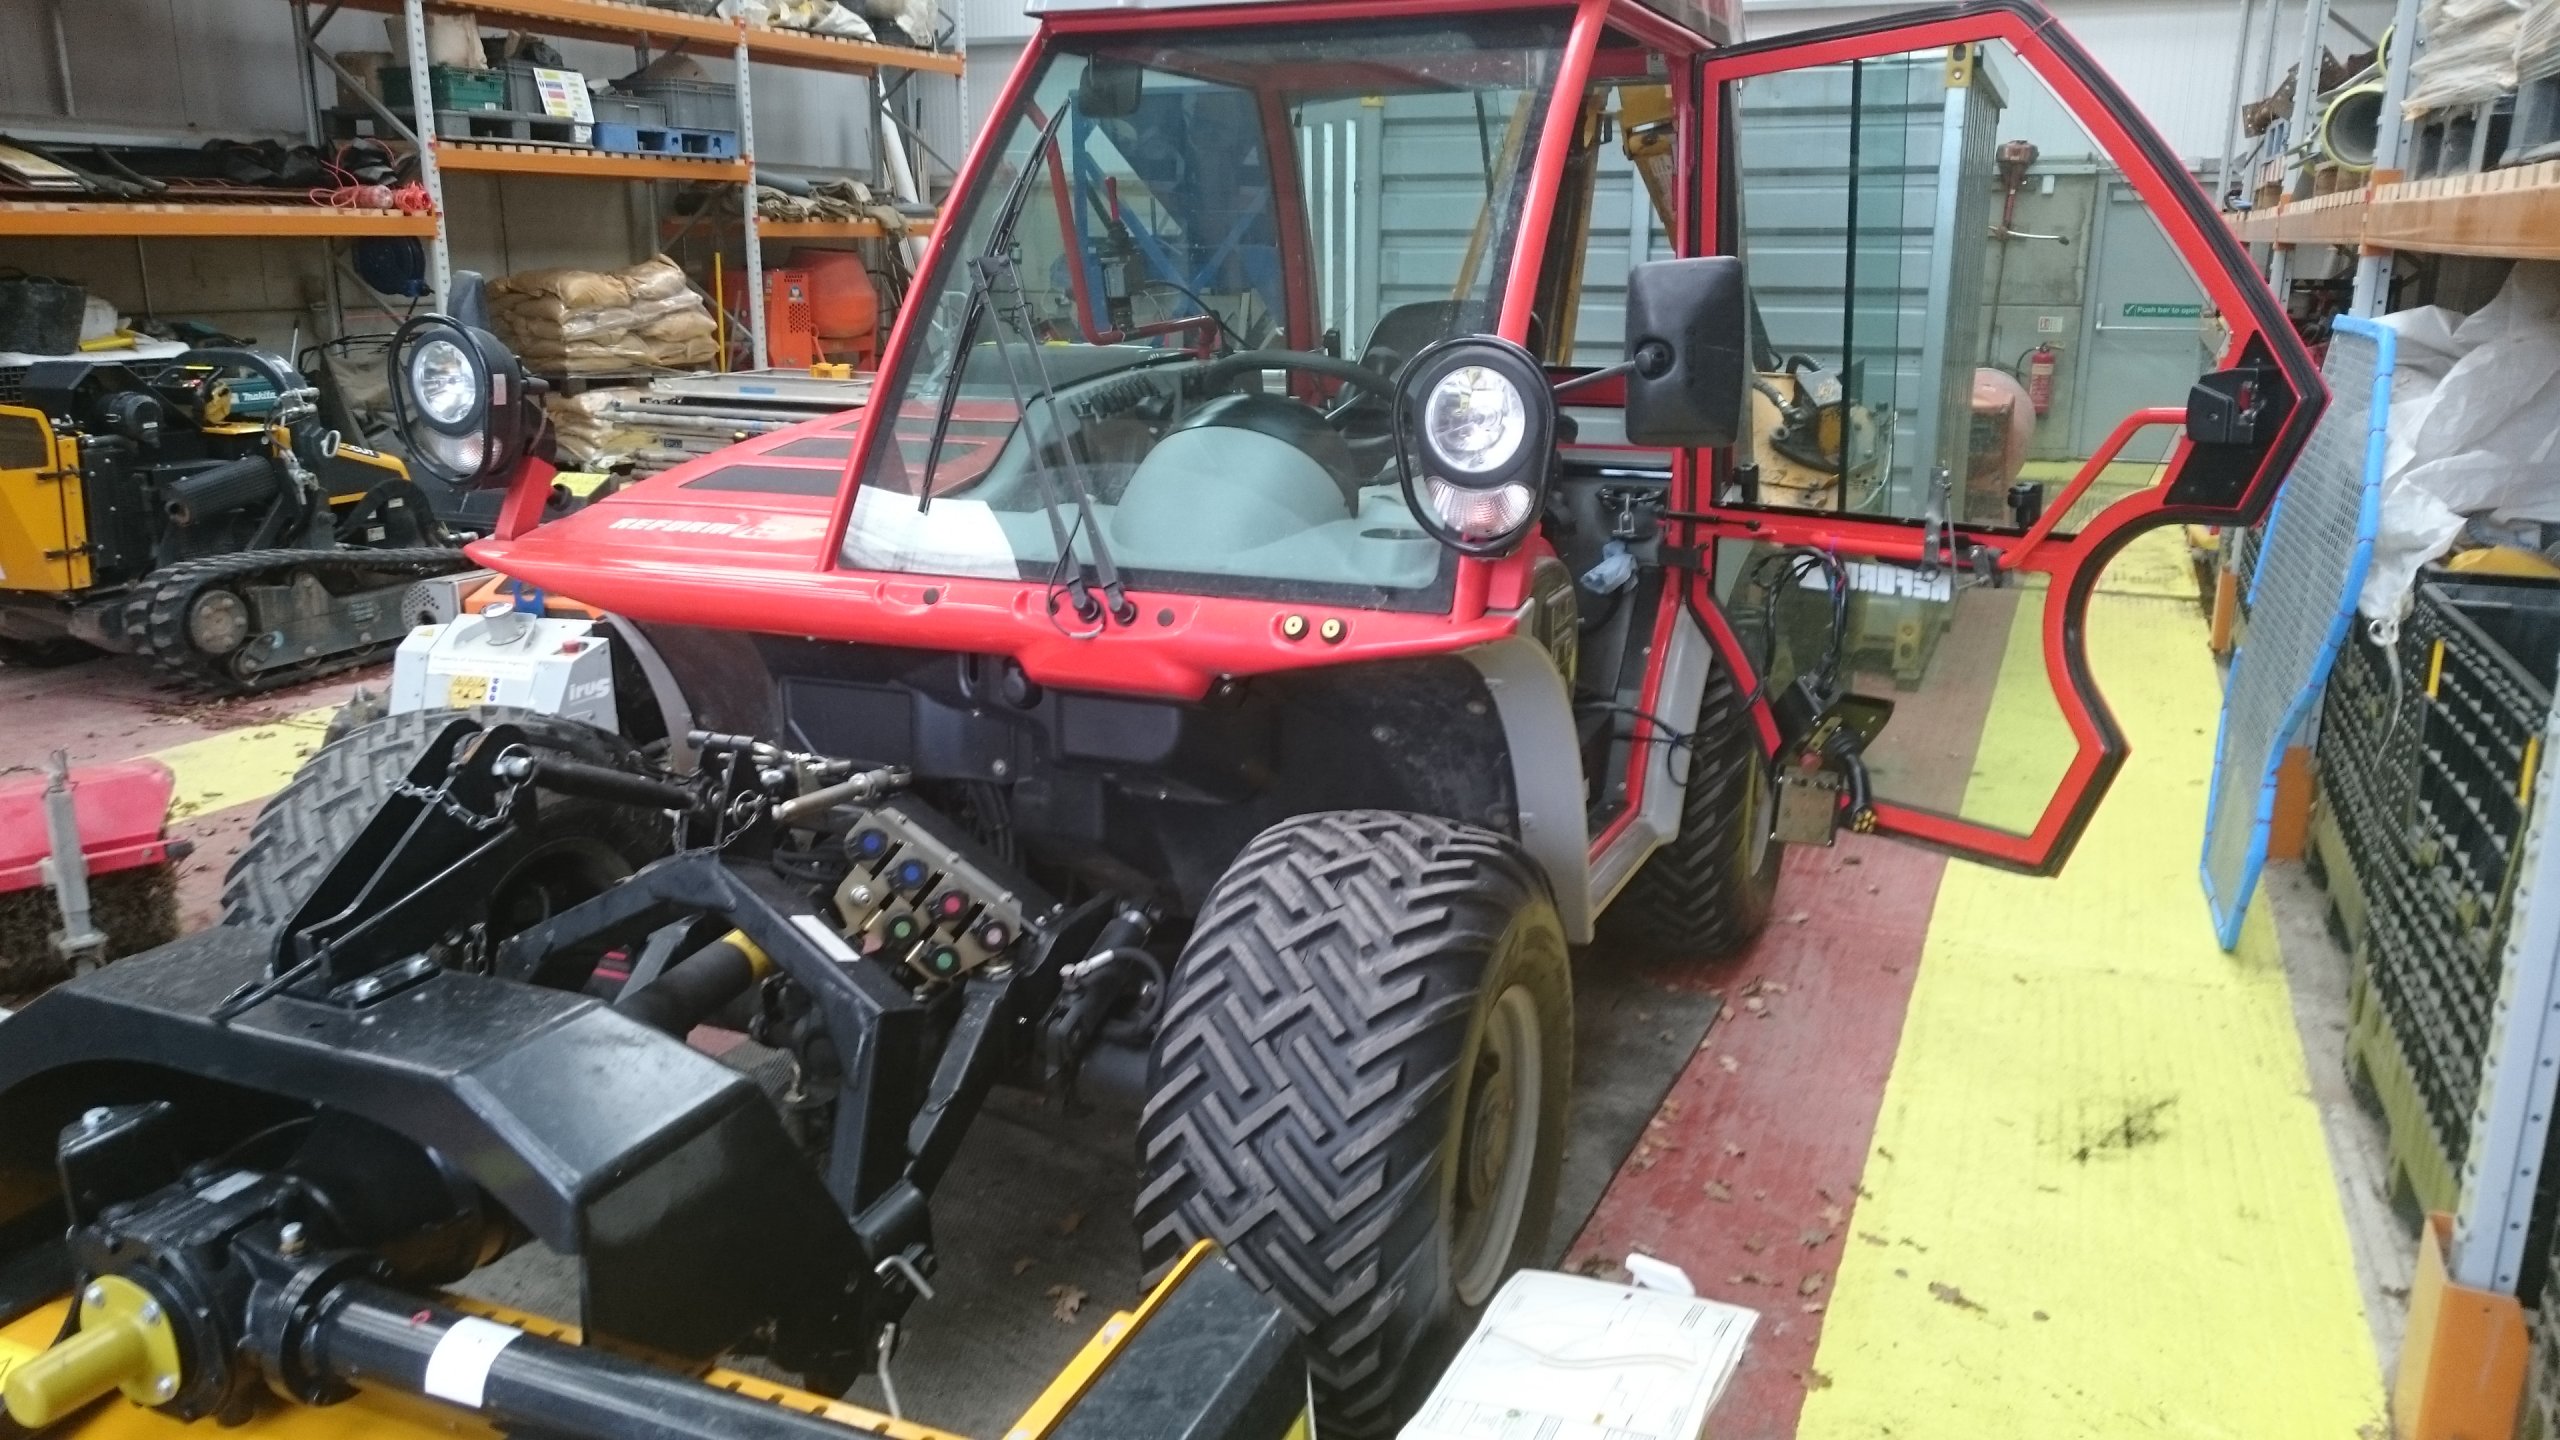 Reform tractor safety window film application to glass to strengthen by Tinting Express Devon